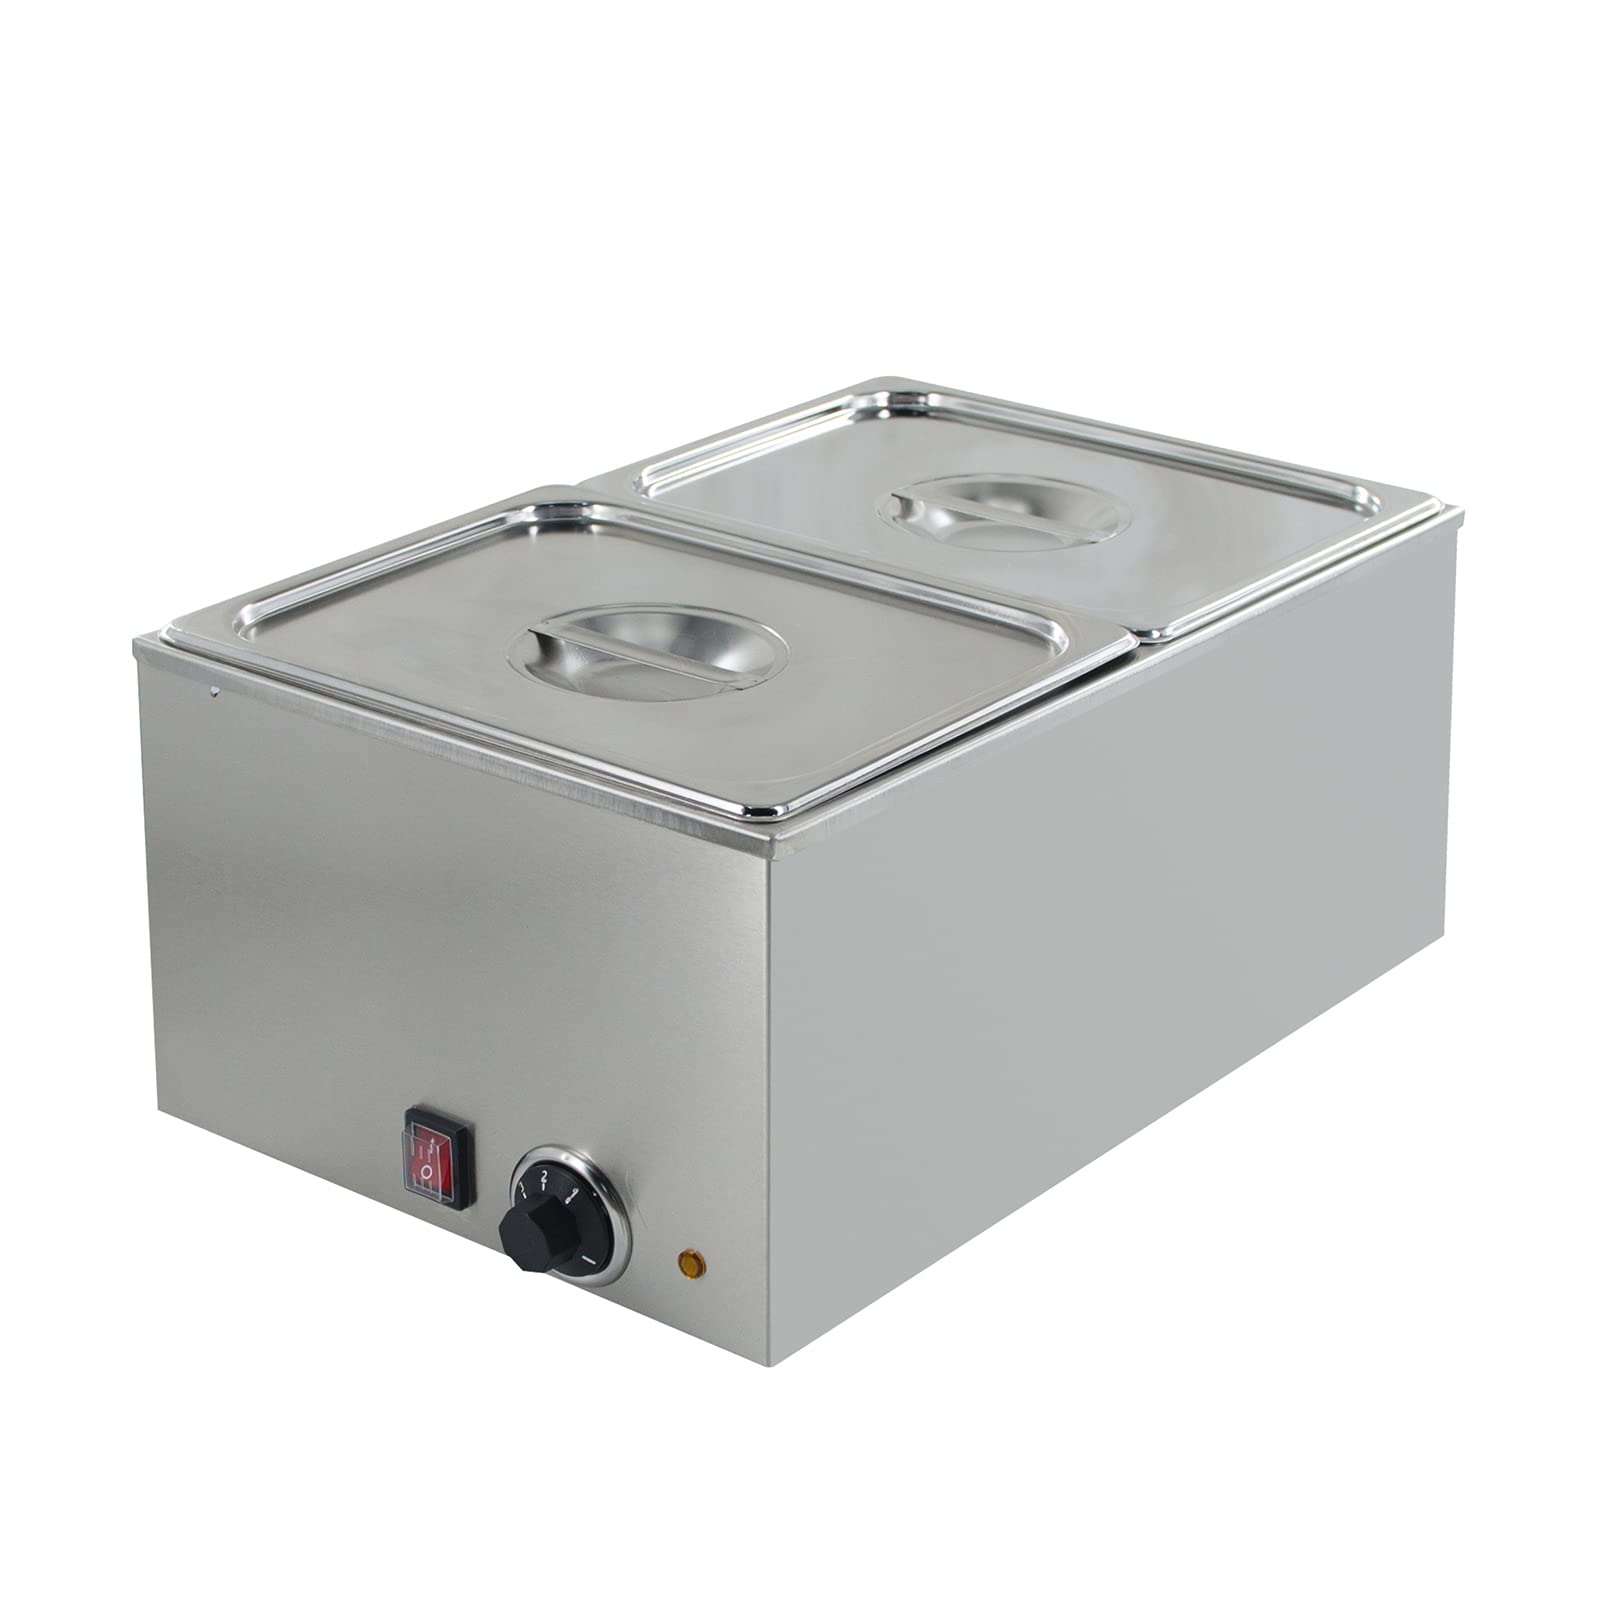 EasyRose Commercial Food Warmer 2-Pan Steam Table Food Warmer with Tem –  Hakka Brothers Corp